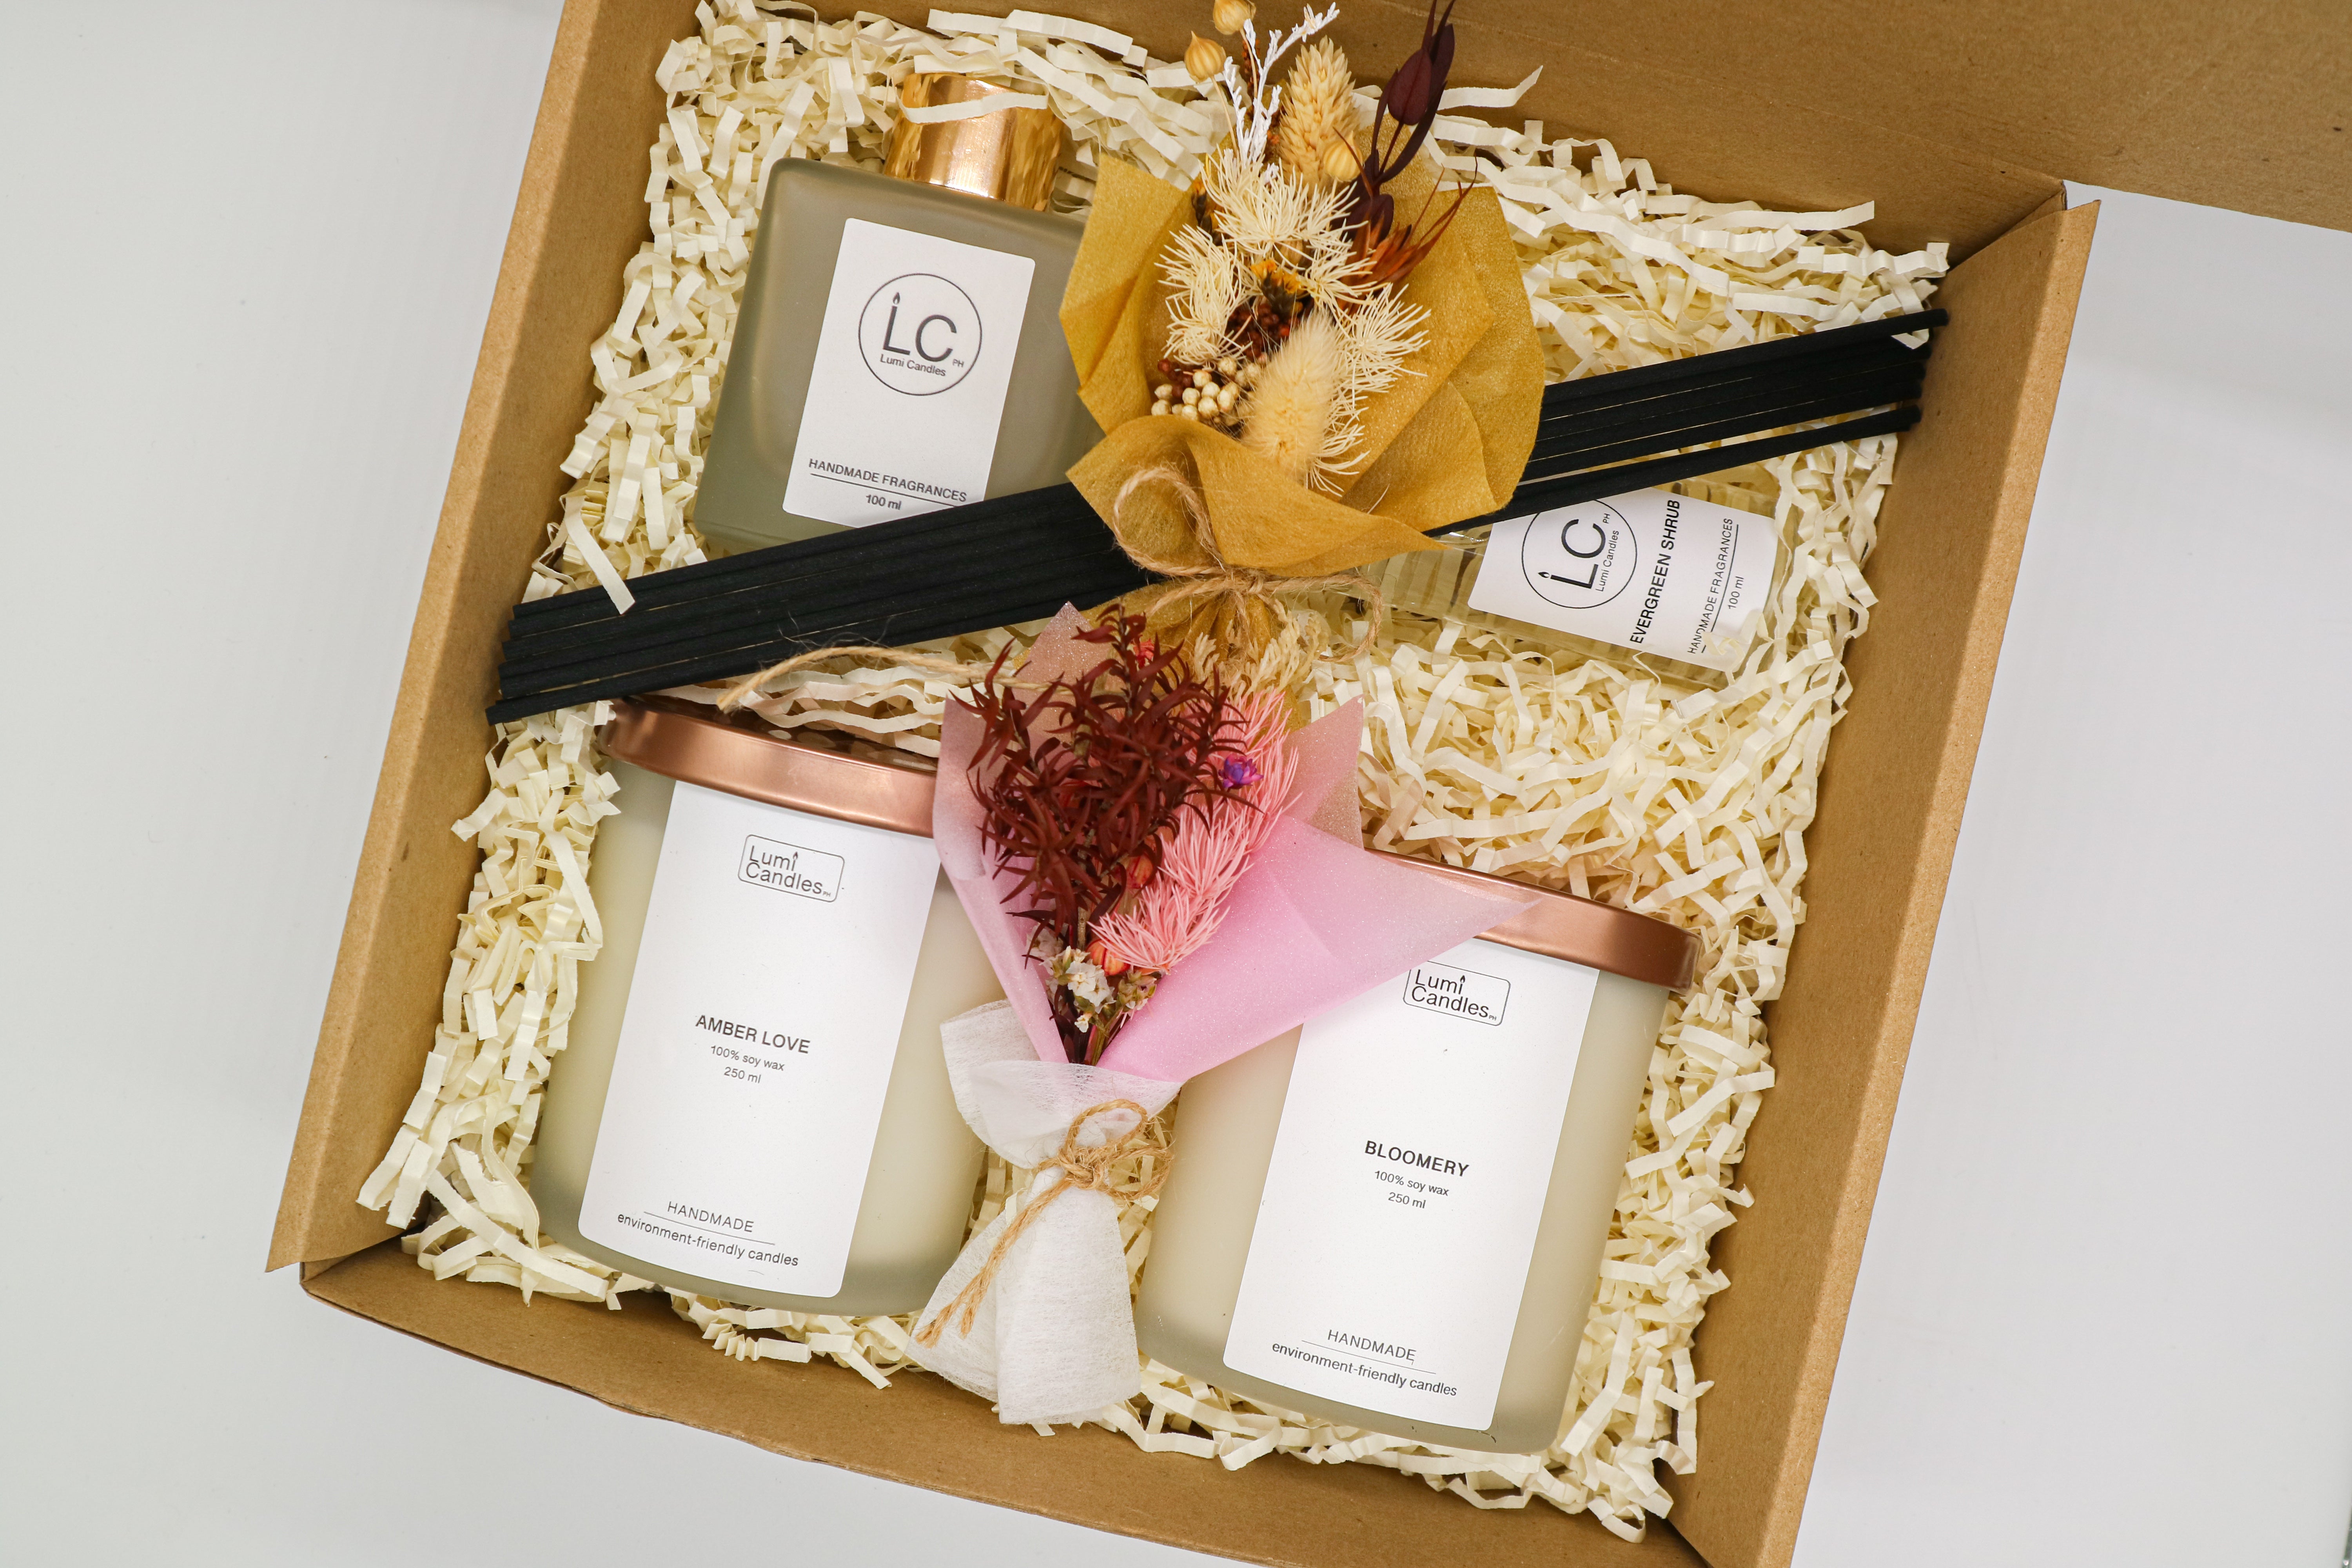 Lumi Candles PH's mother's day gift set